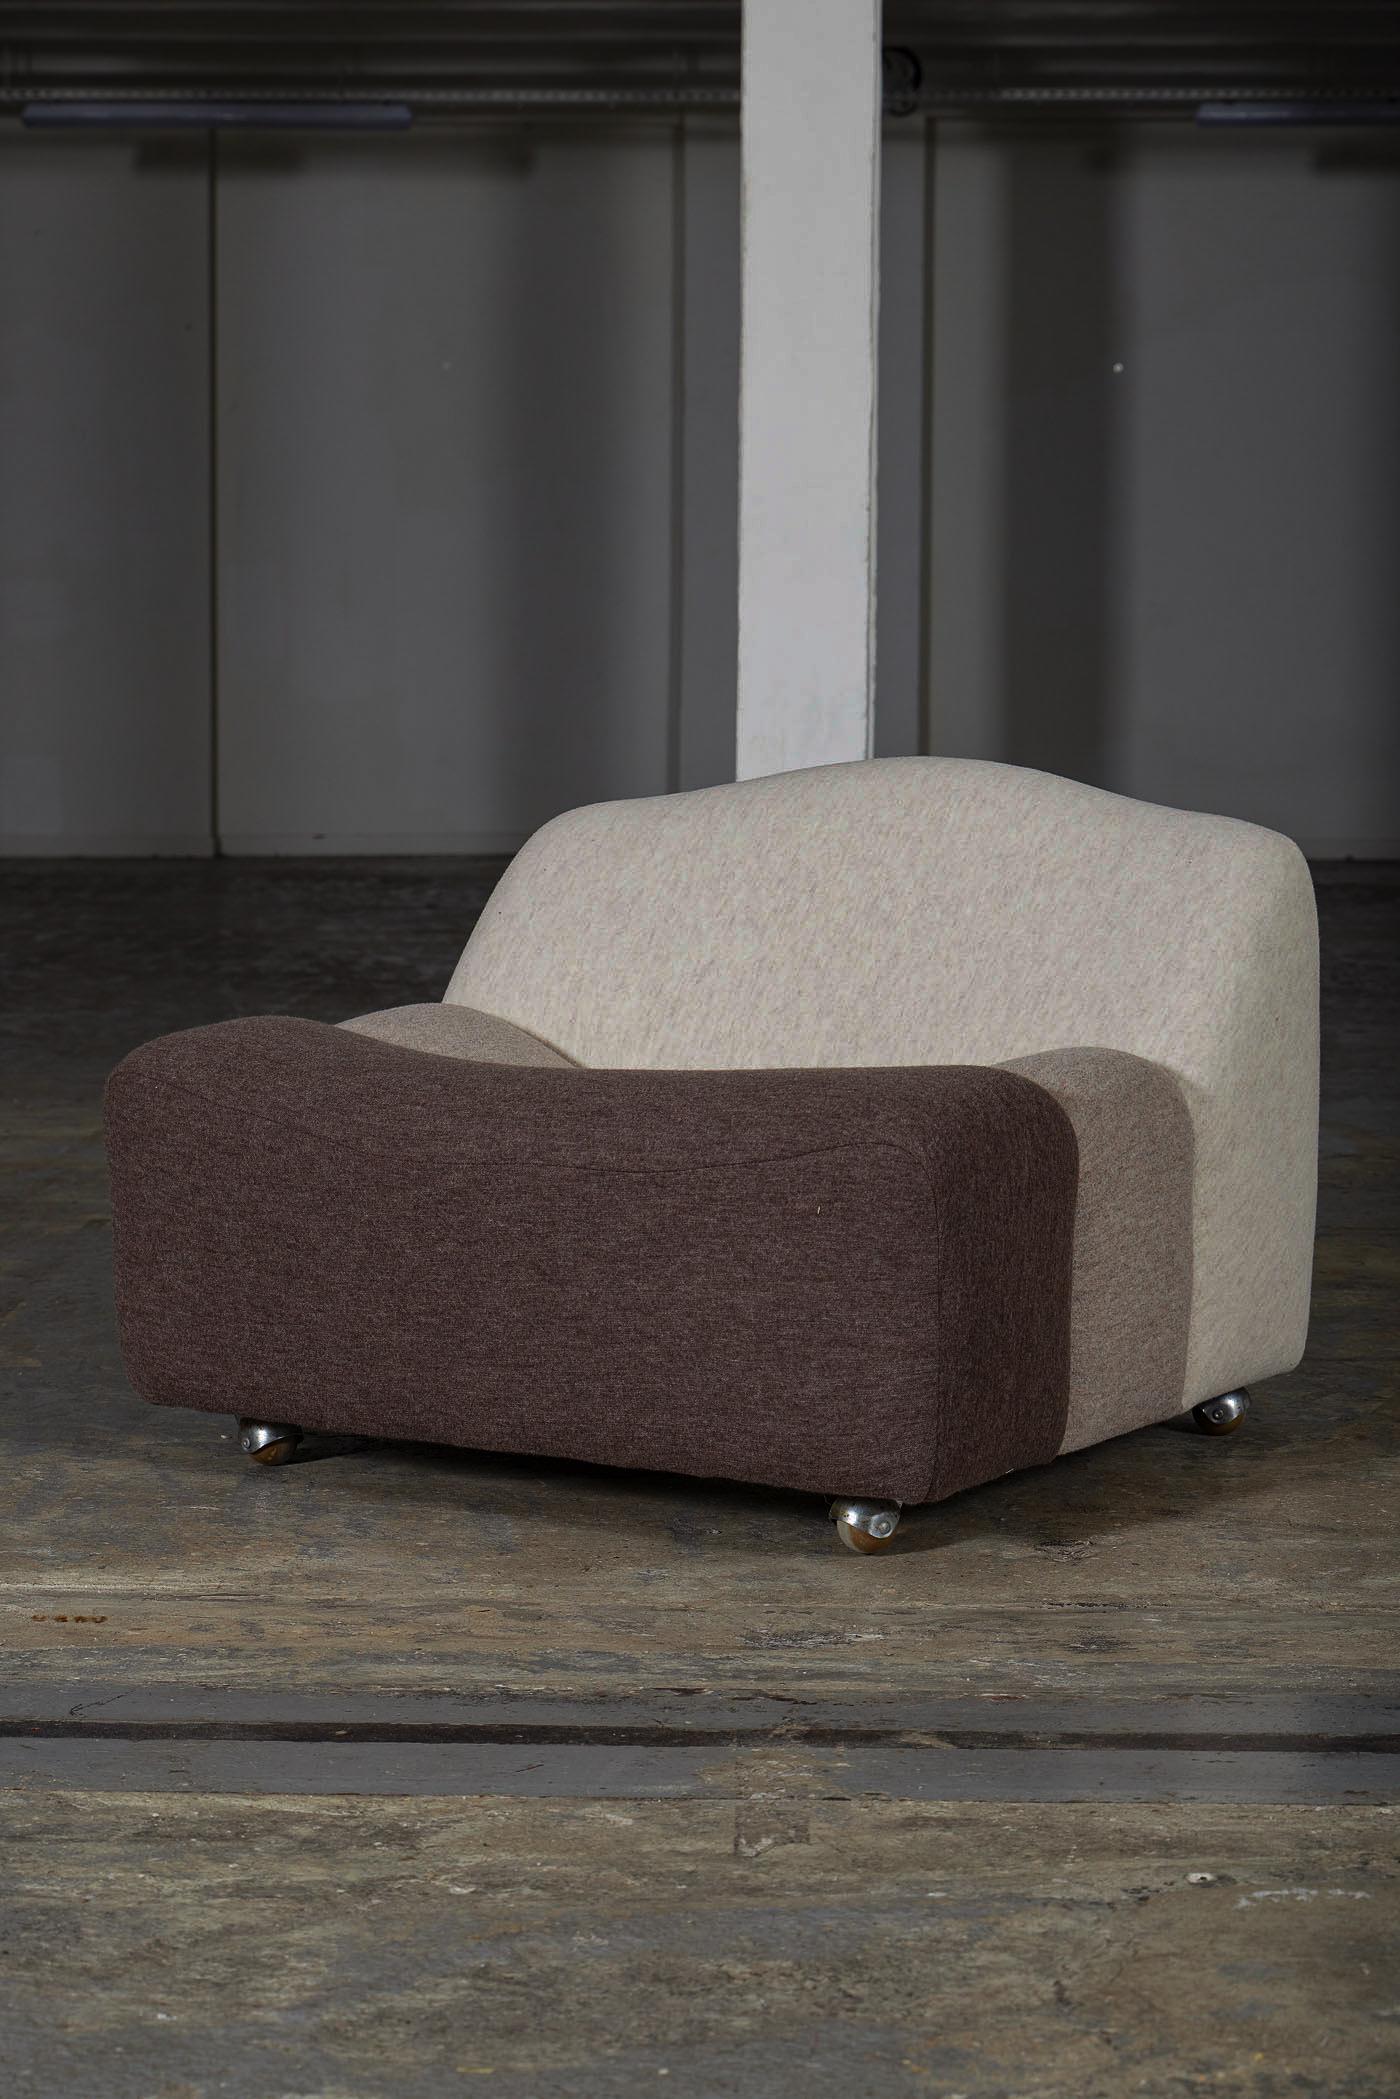 ABCD armchair by the famous French designer Pierre Paulin (1927-2009), from the 1970s. The armchair's fabric features a range of beige hues and rests on casters for easy movement. This iconic armchair is characterized by a modular and undulating